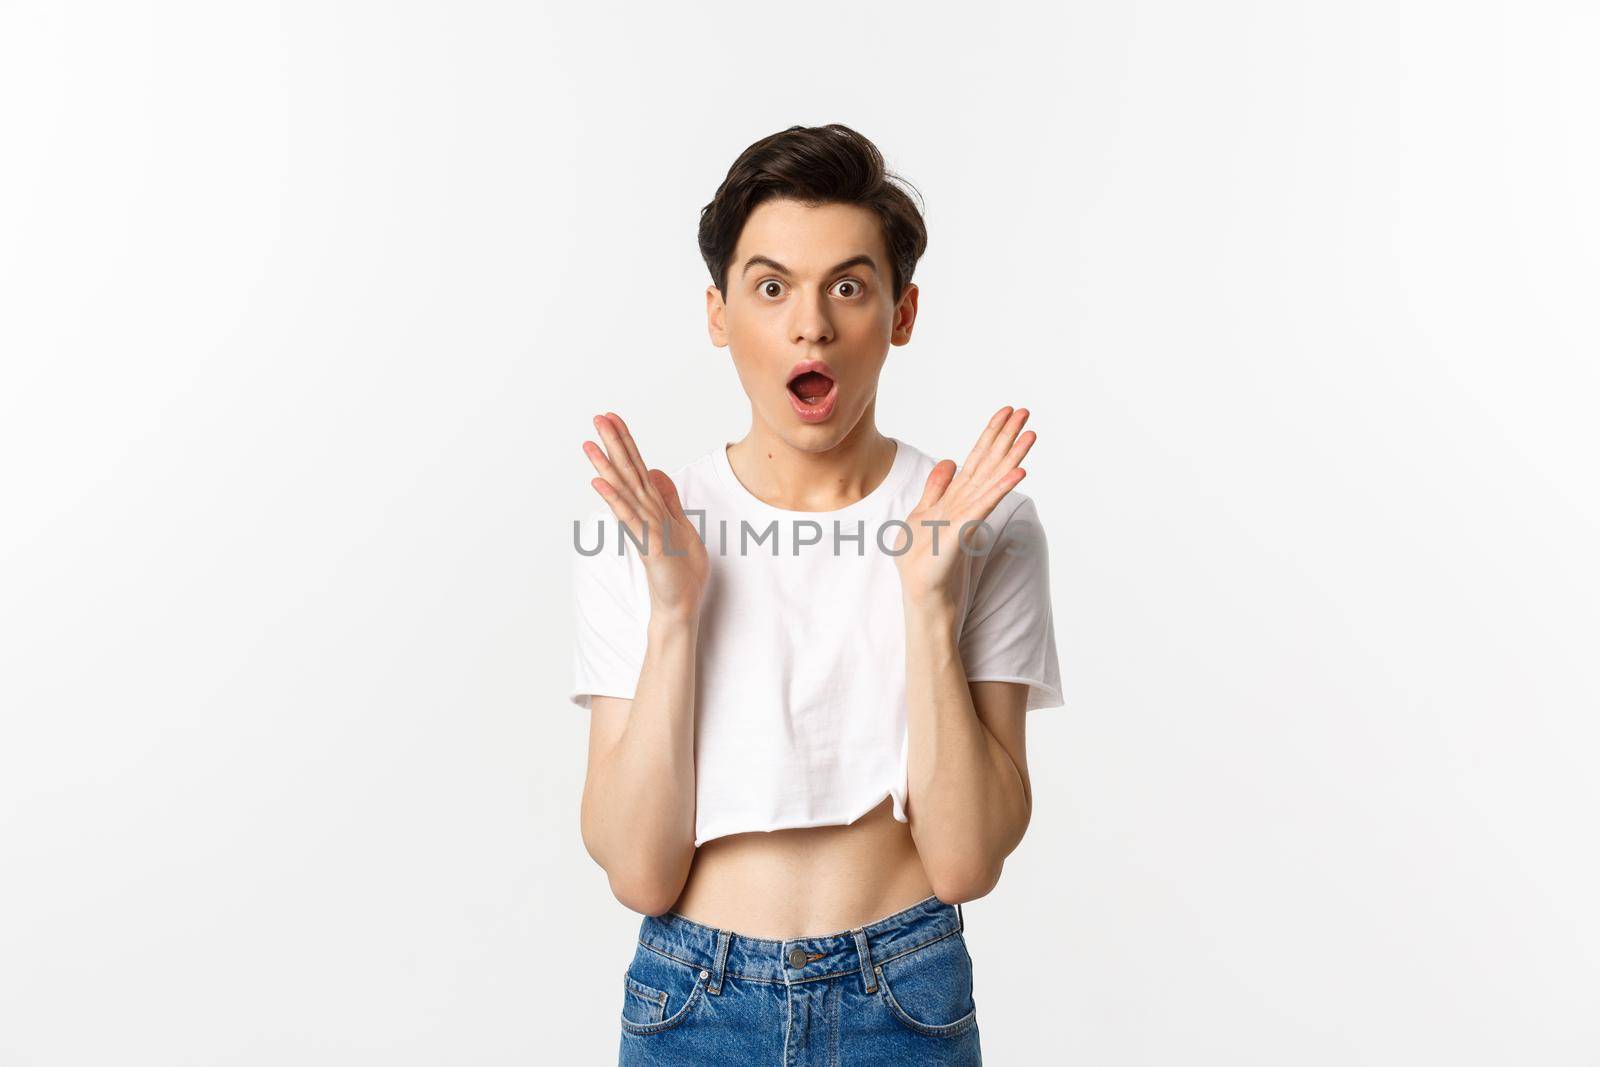 Lgbtq and pride concept. Image of surprised queer guy clap hands and looking in awe at camera, standing in crop top against white background.